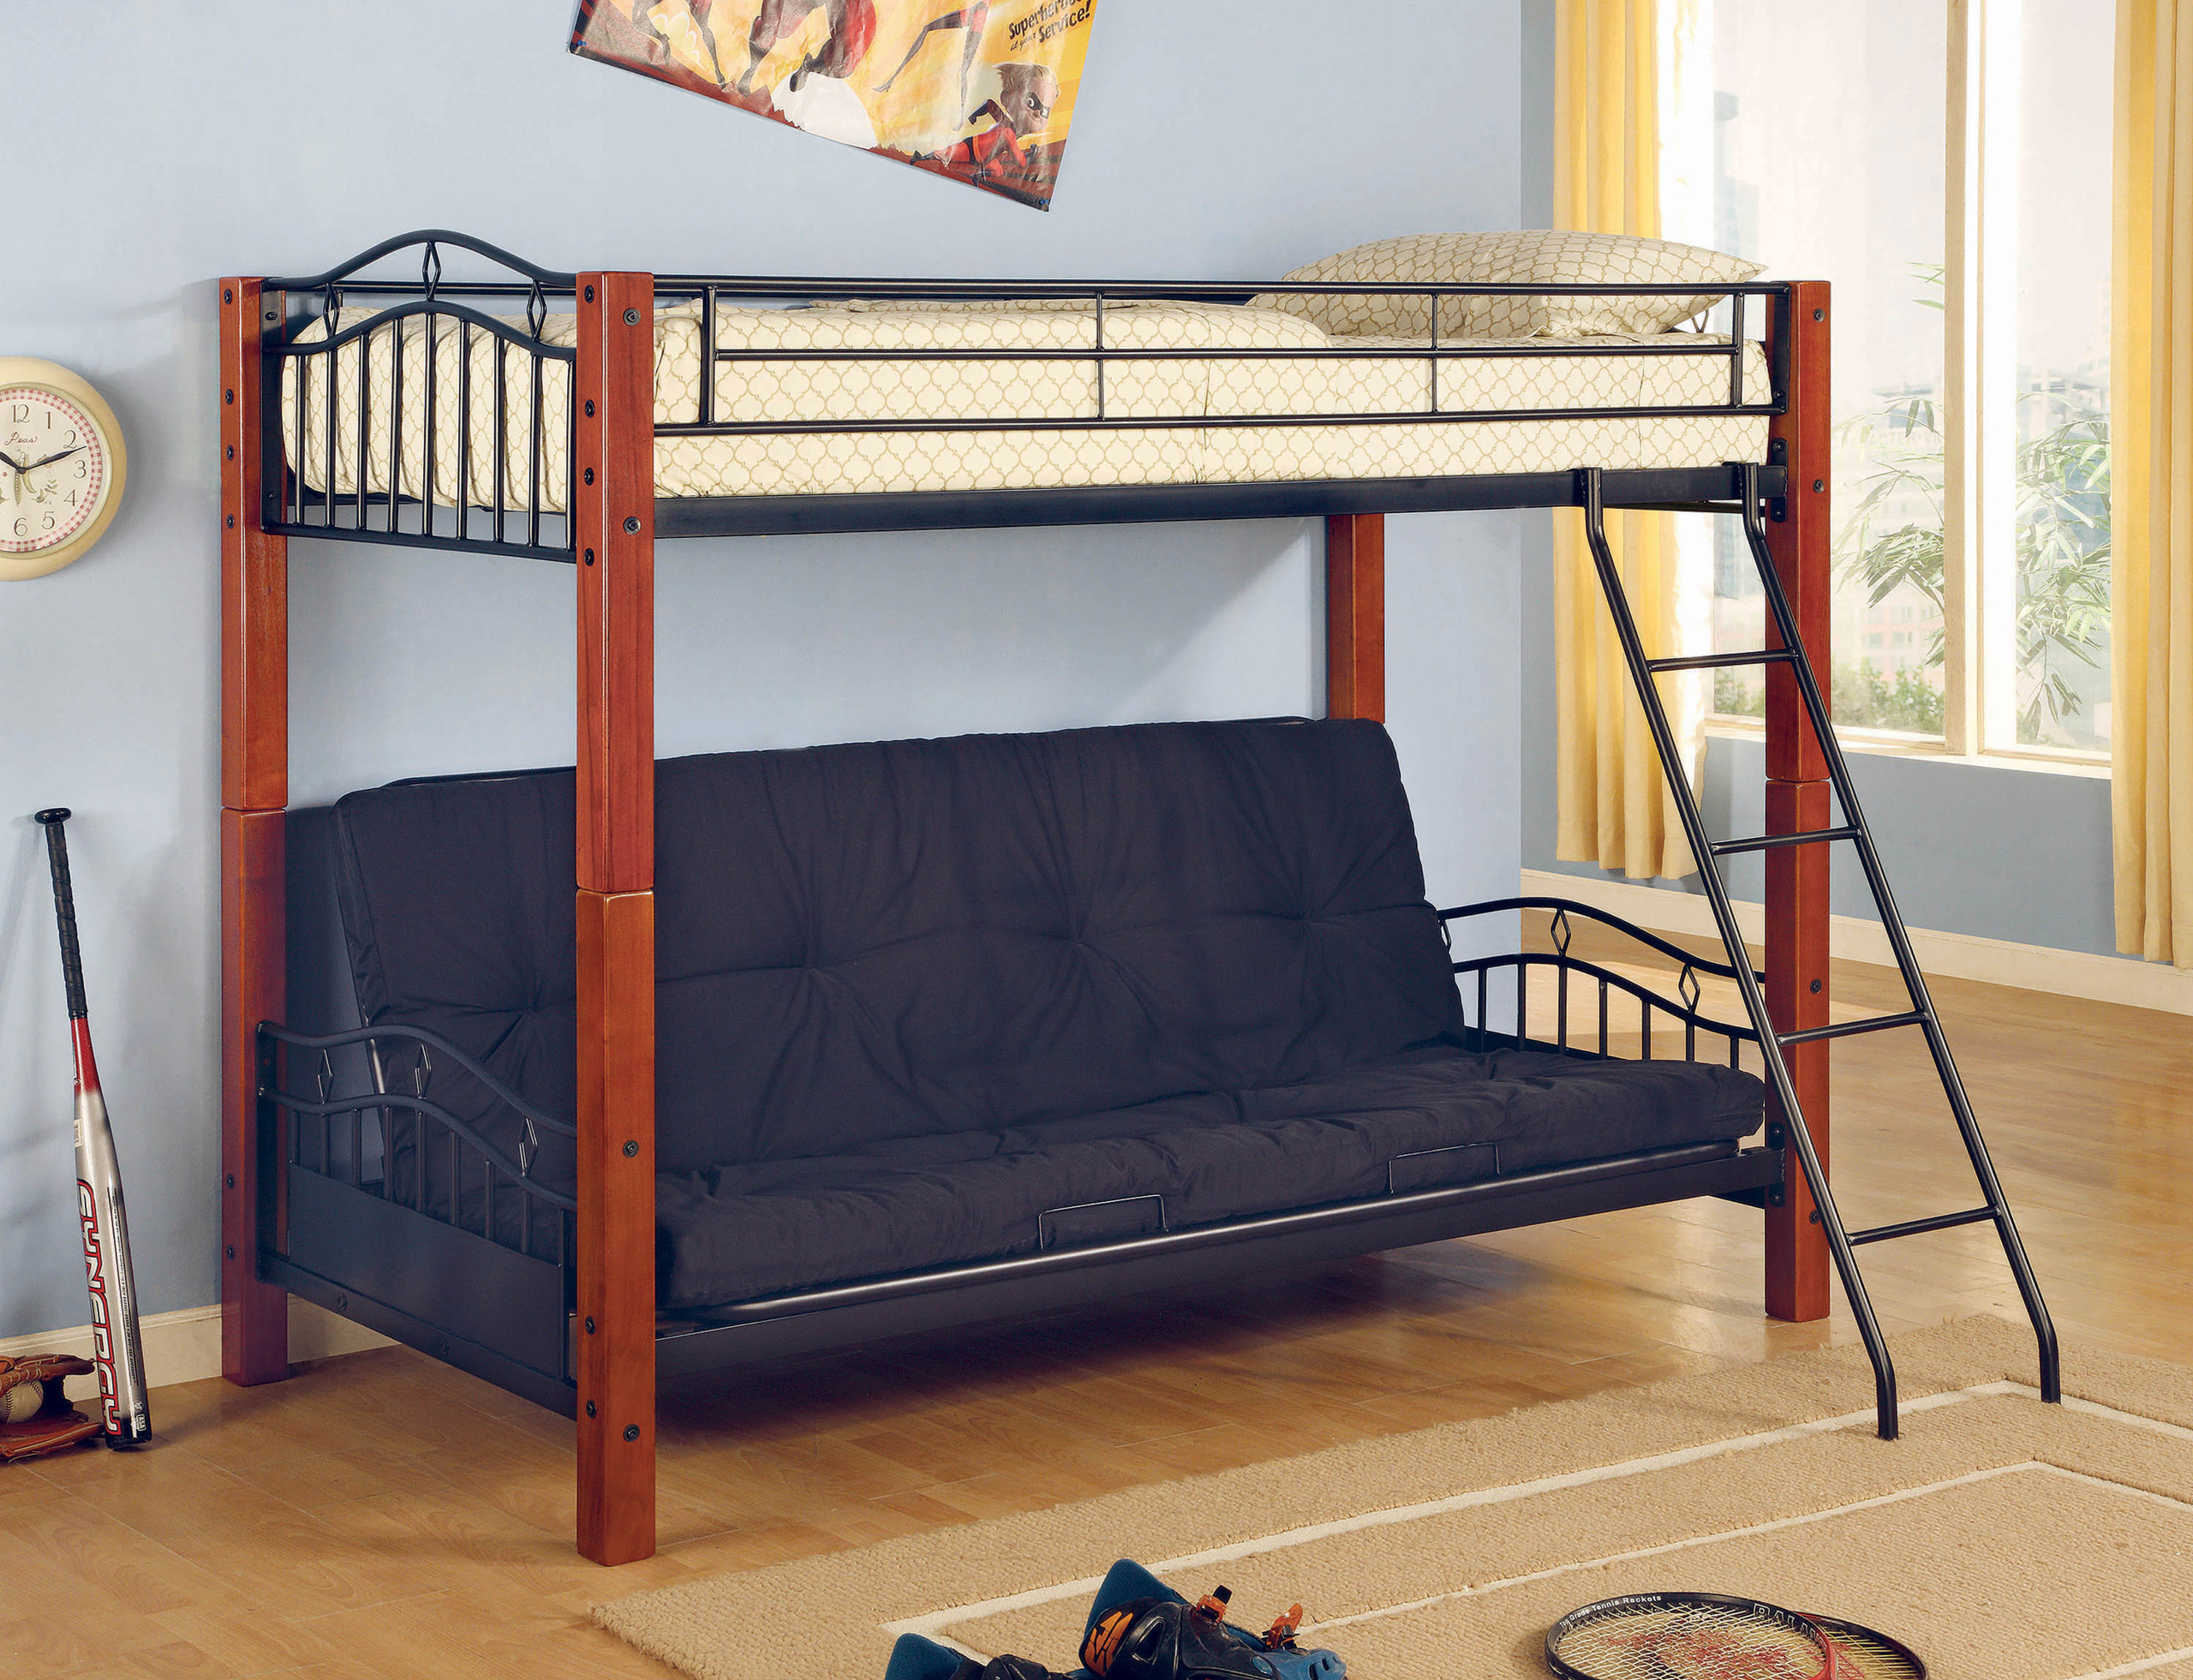 Full Over Futon Bunk Bed Visualhunt, Bunk Bed And Futon